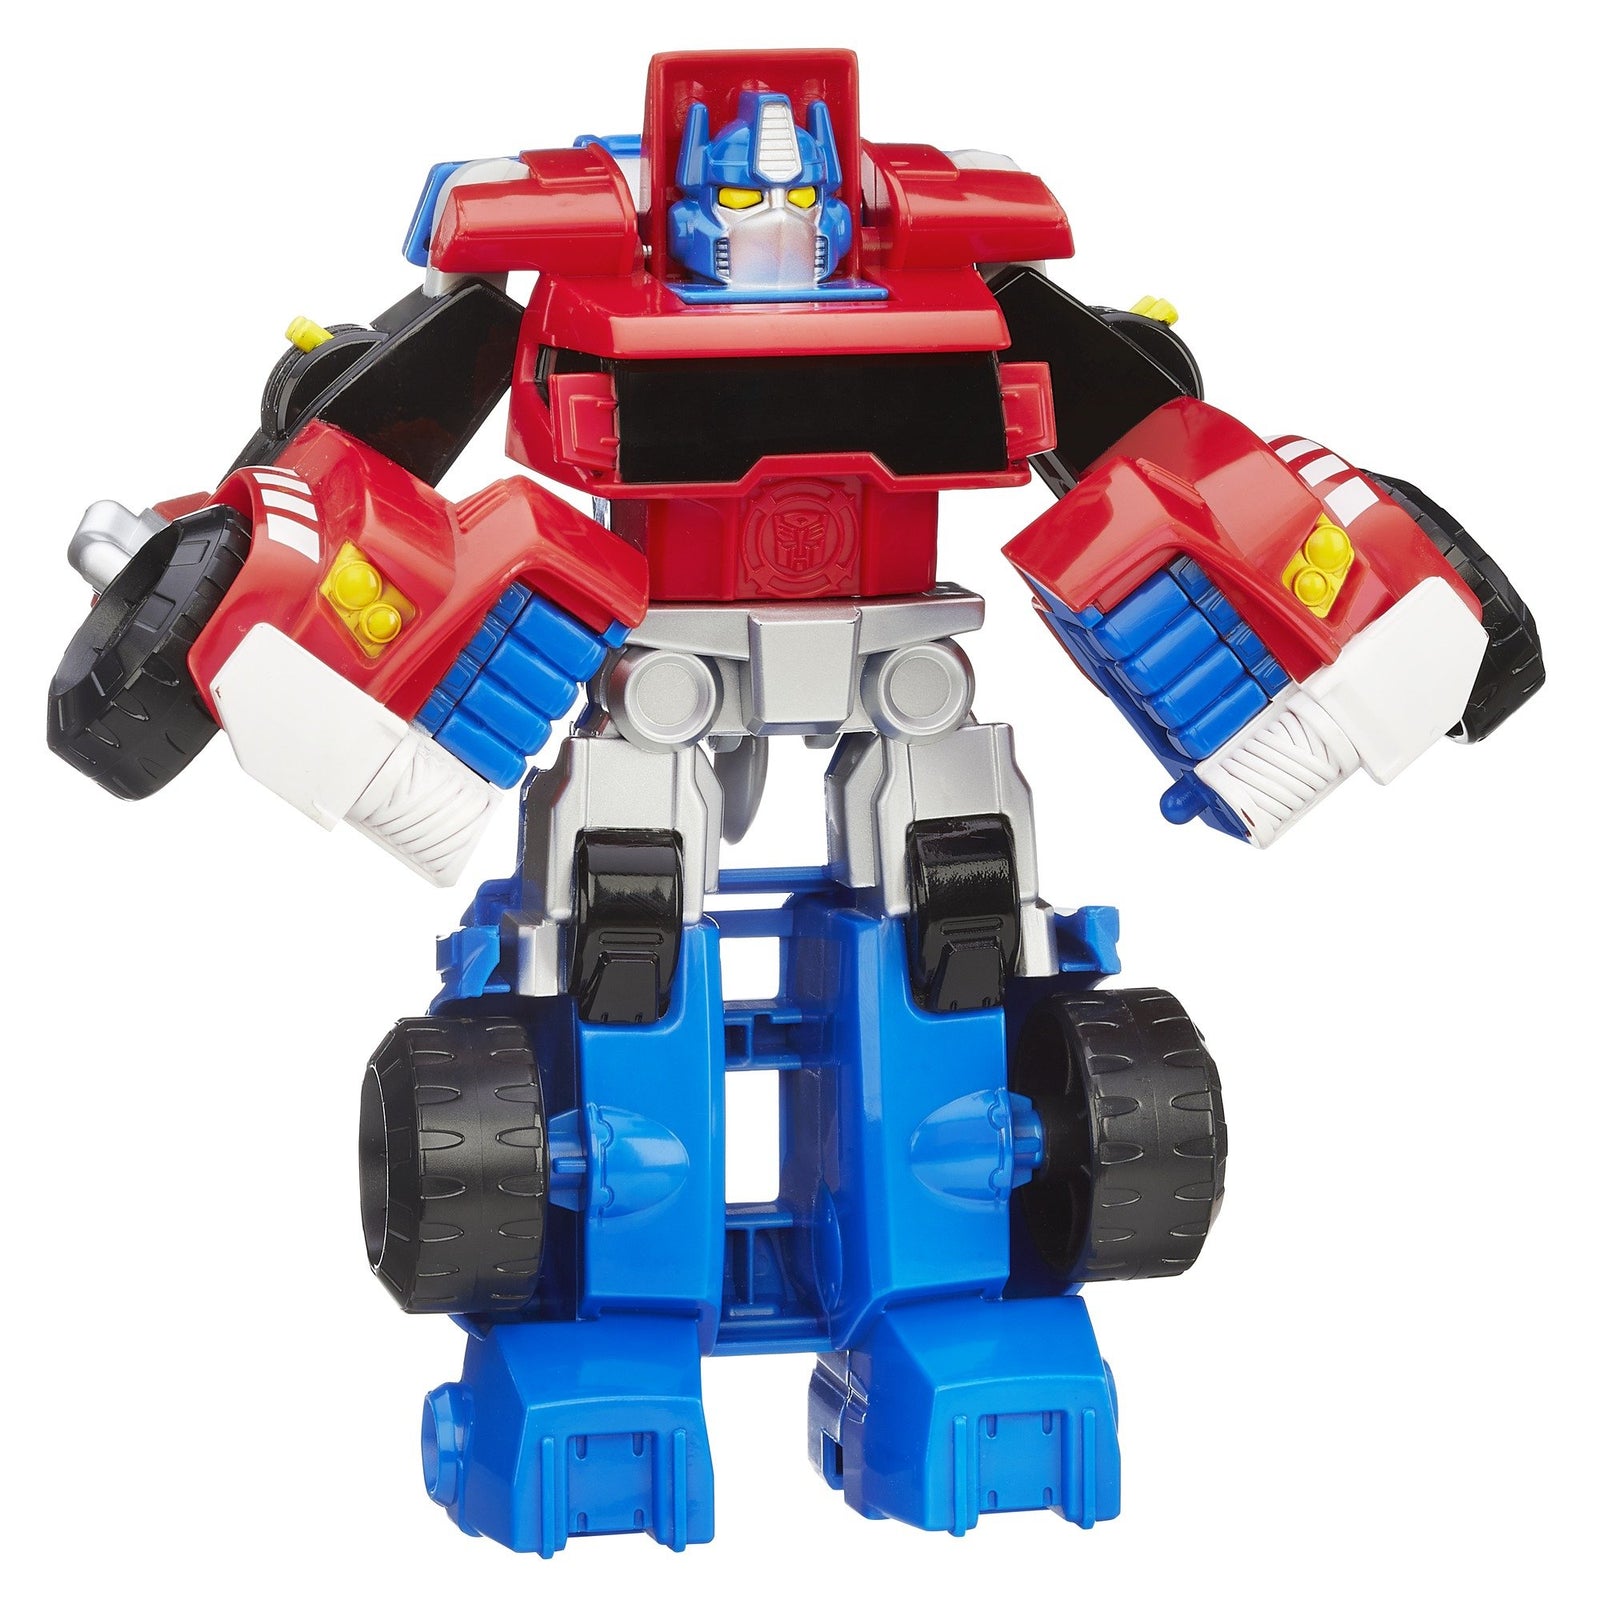 Playskool Heroes Transformers Rescue Bots Optimus Prime Action Figure, Ages 3-7 (Amazon Exclusive)